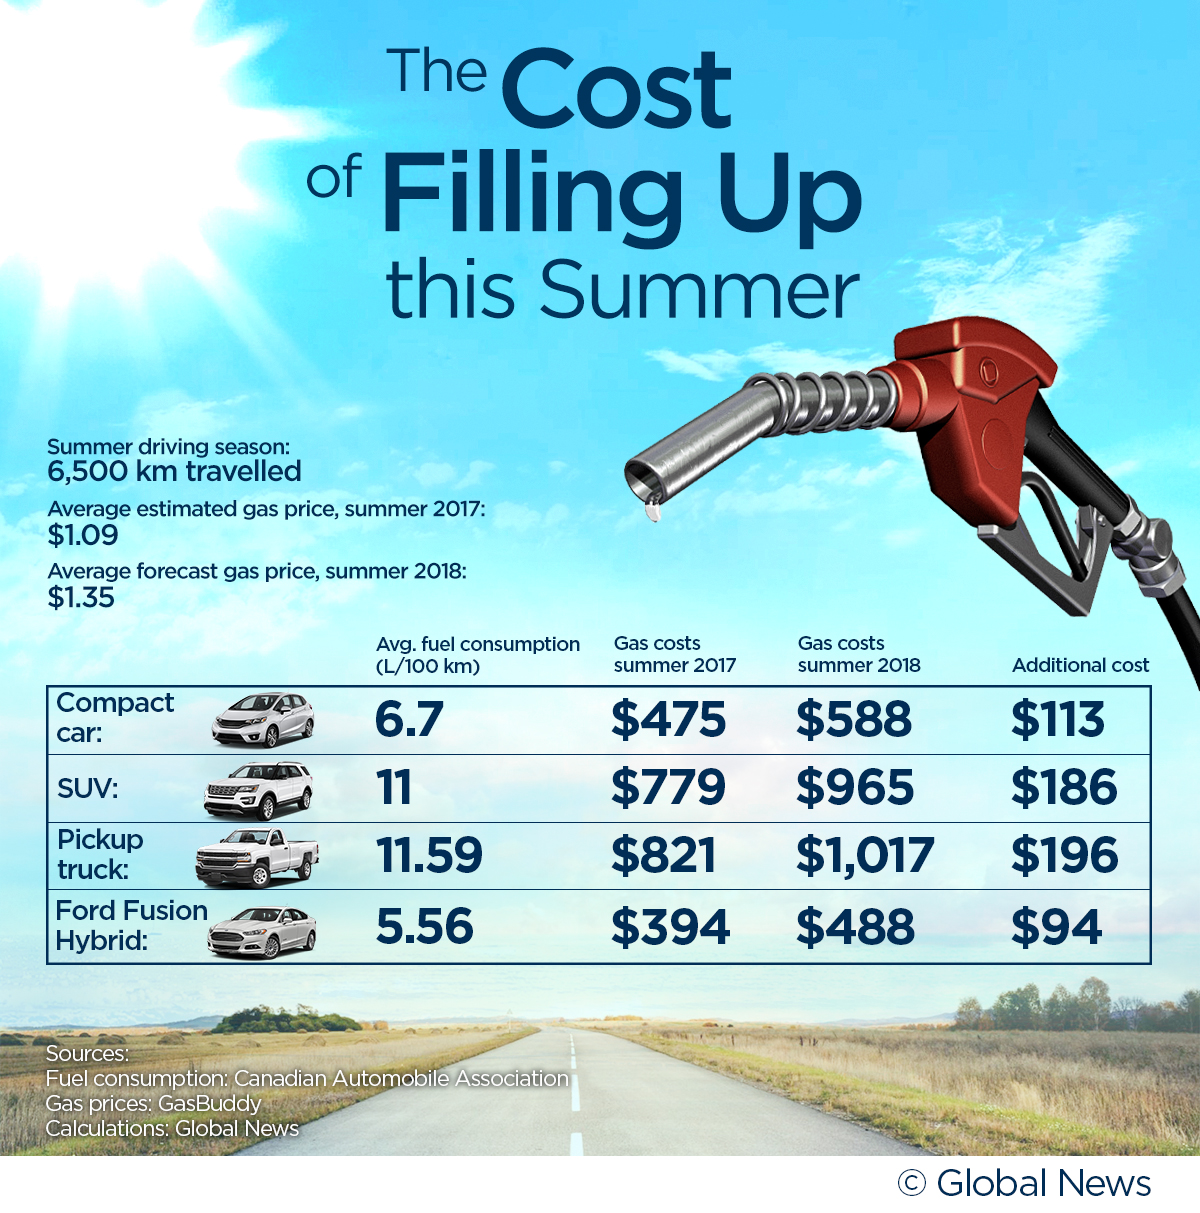 Will gas prices go up or down on May long weekend? Depends where in